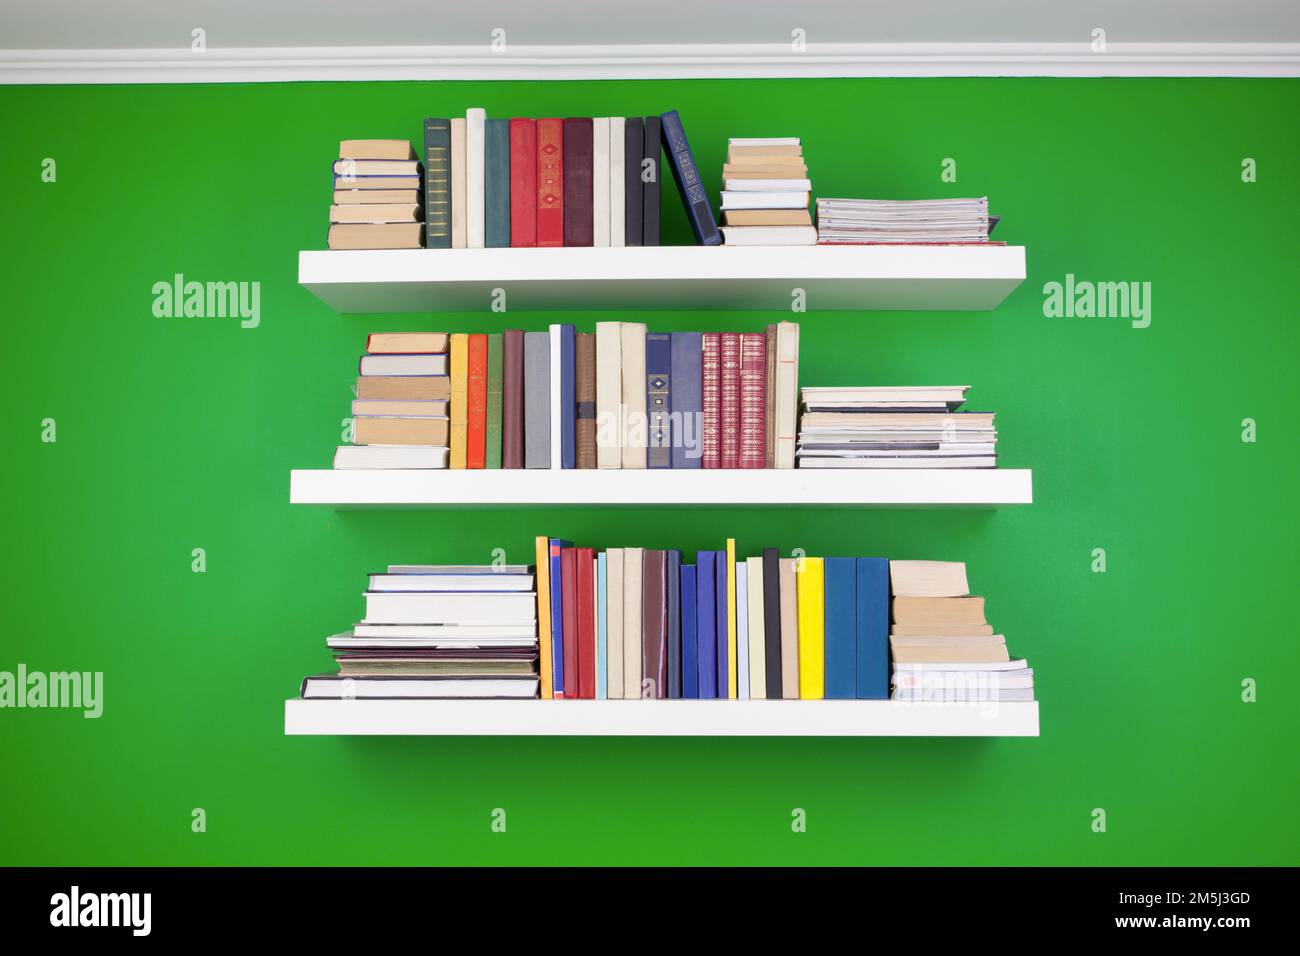 neat stacks and rows of books on white shelves against a green wall Stock Photo